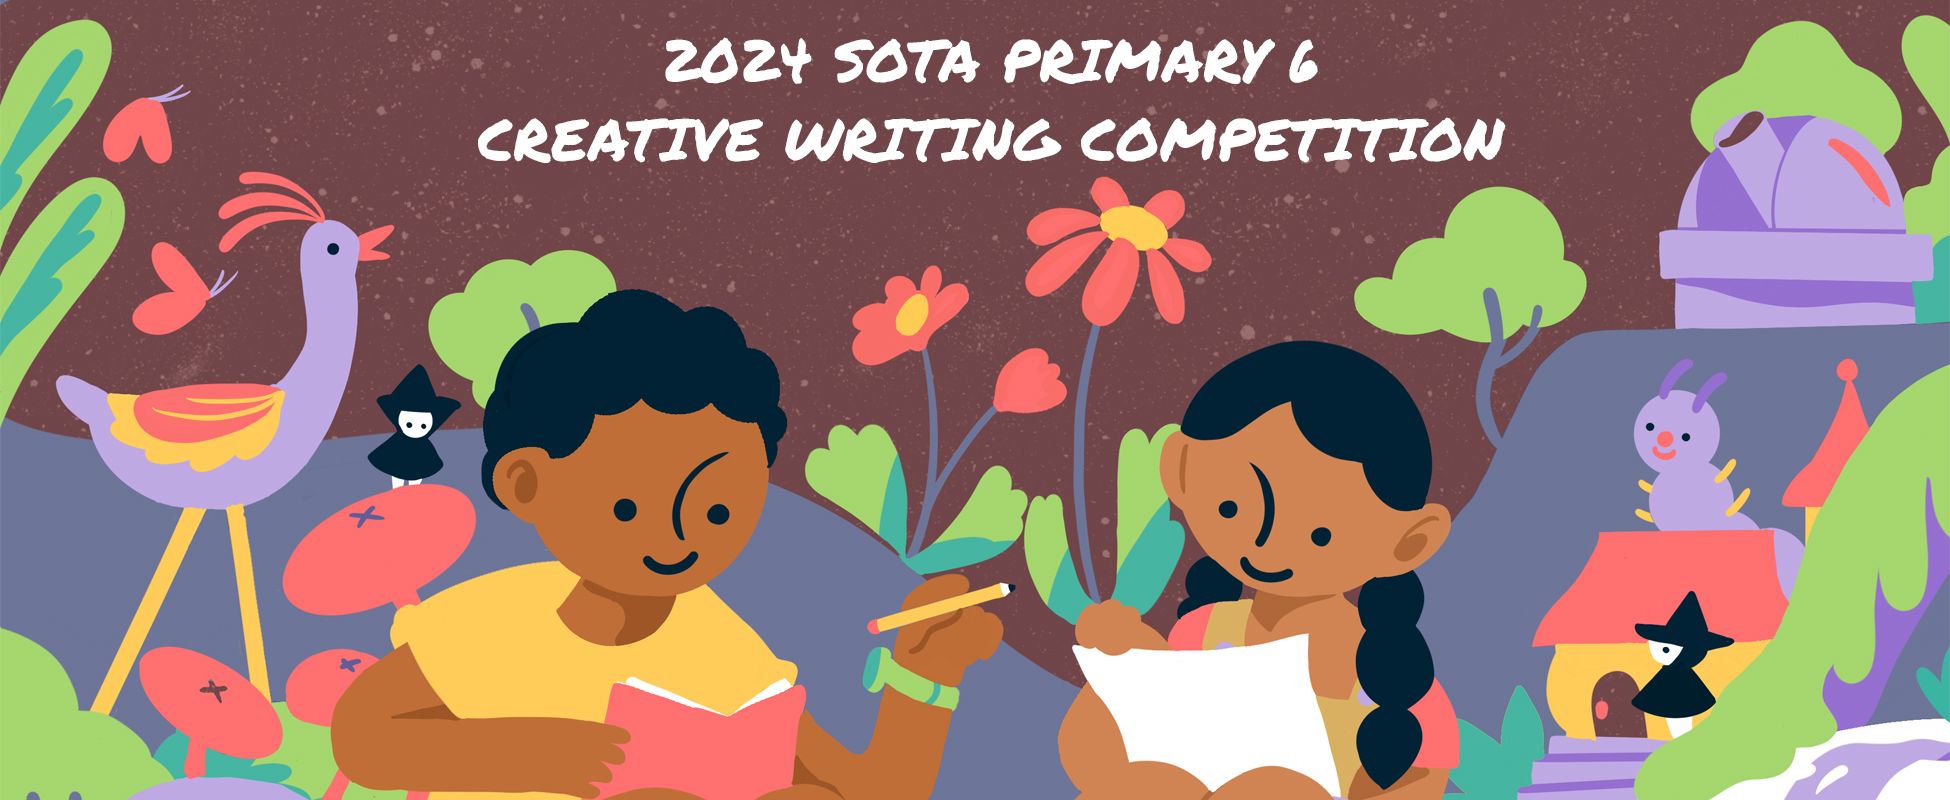 sota creative writing competition 2022